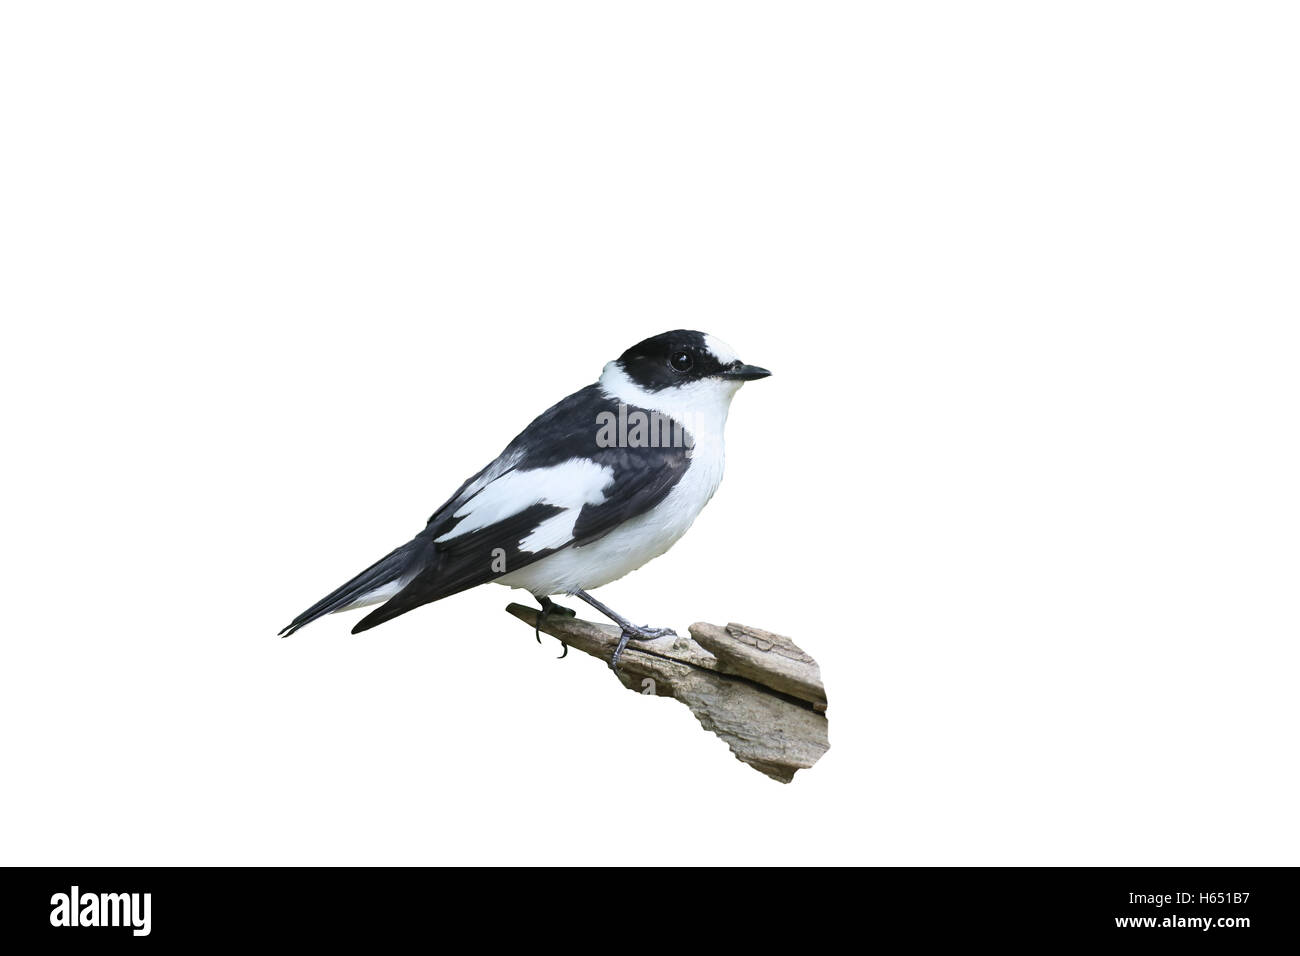 Collared flycatcher, Ficedula albicollis, single male on branch, Hungary, May 2016 Stock Photo